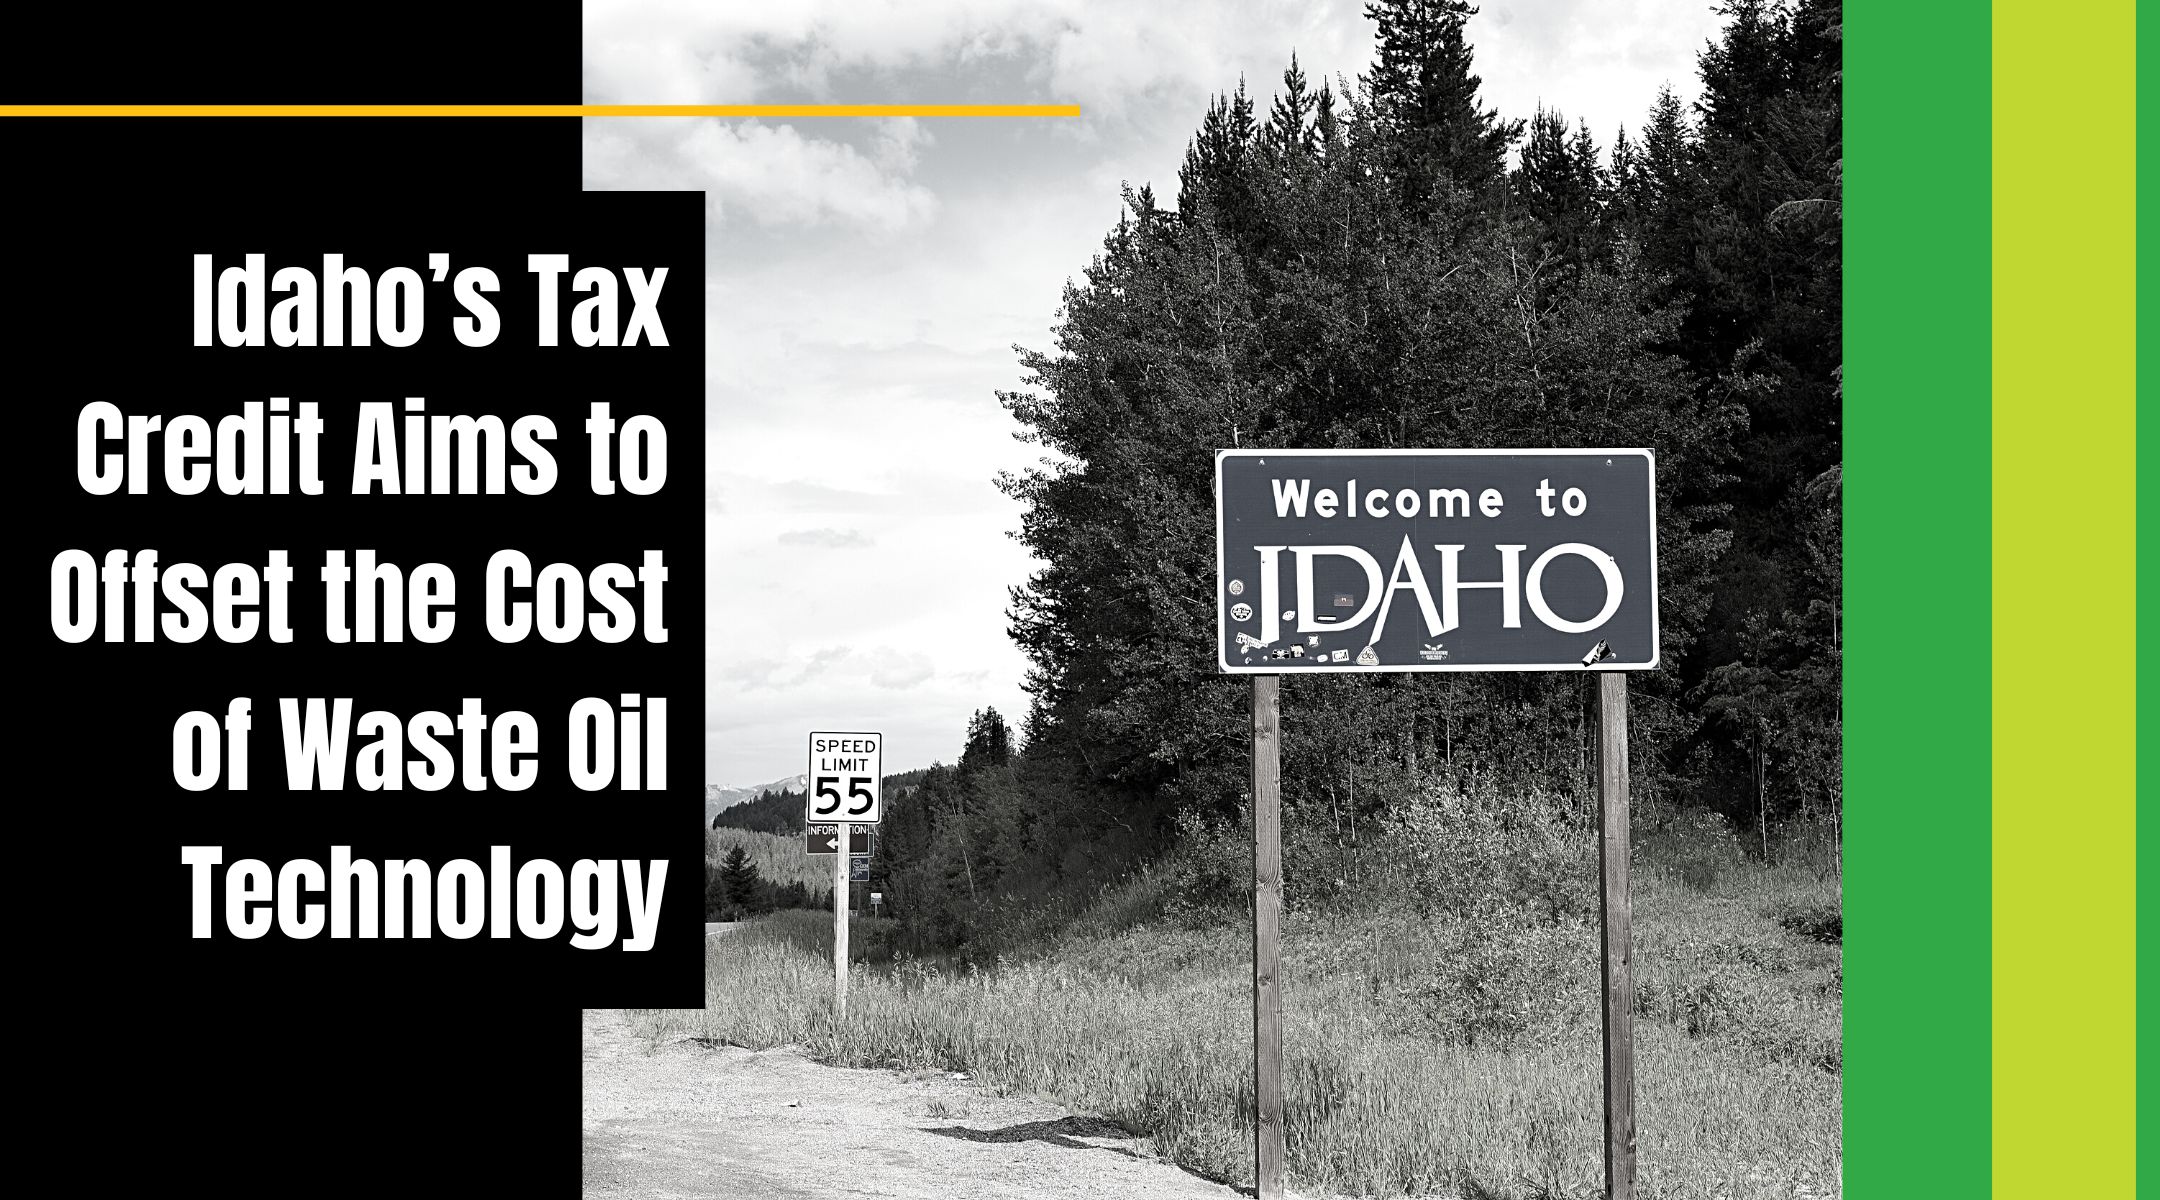 Idaho’s Tax Credit Aims to Offset the Cost of Waste Oil Technology